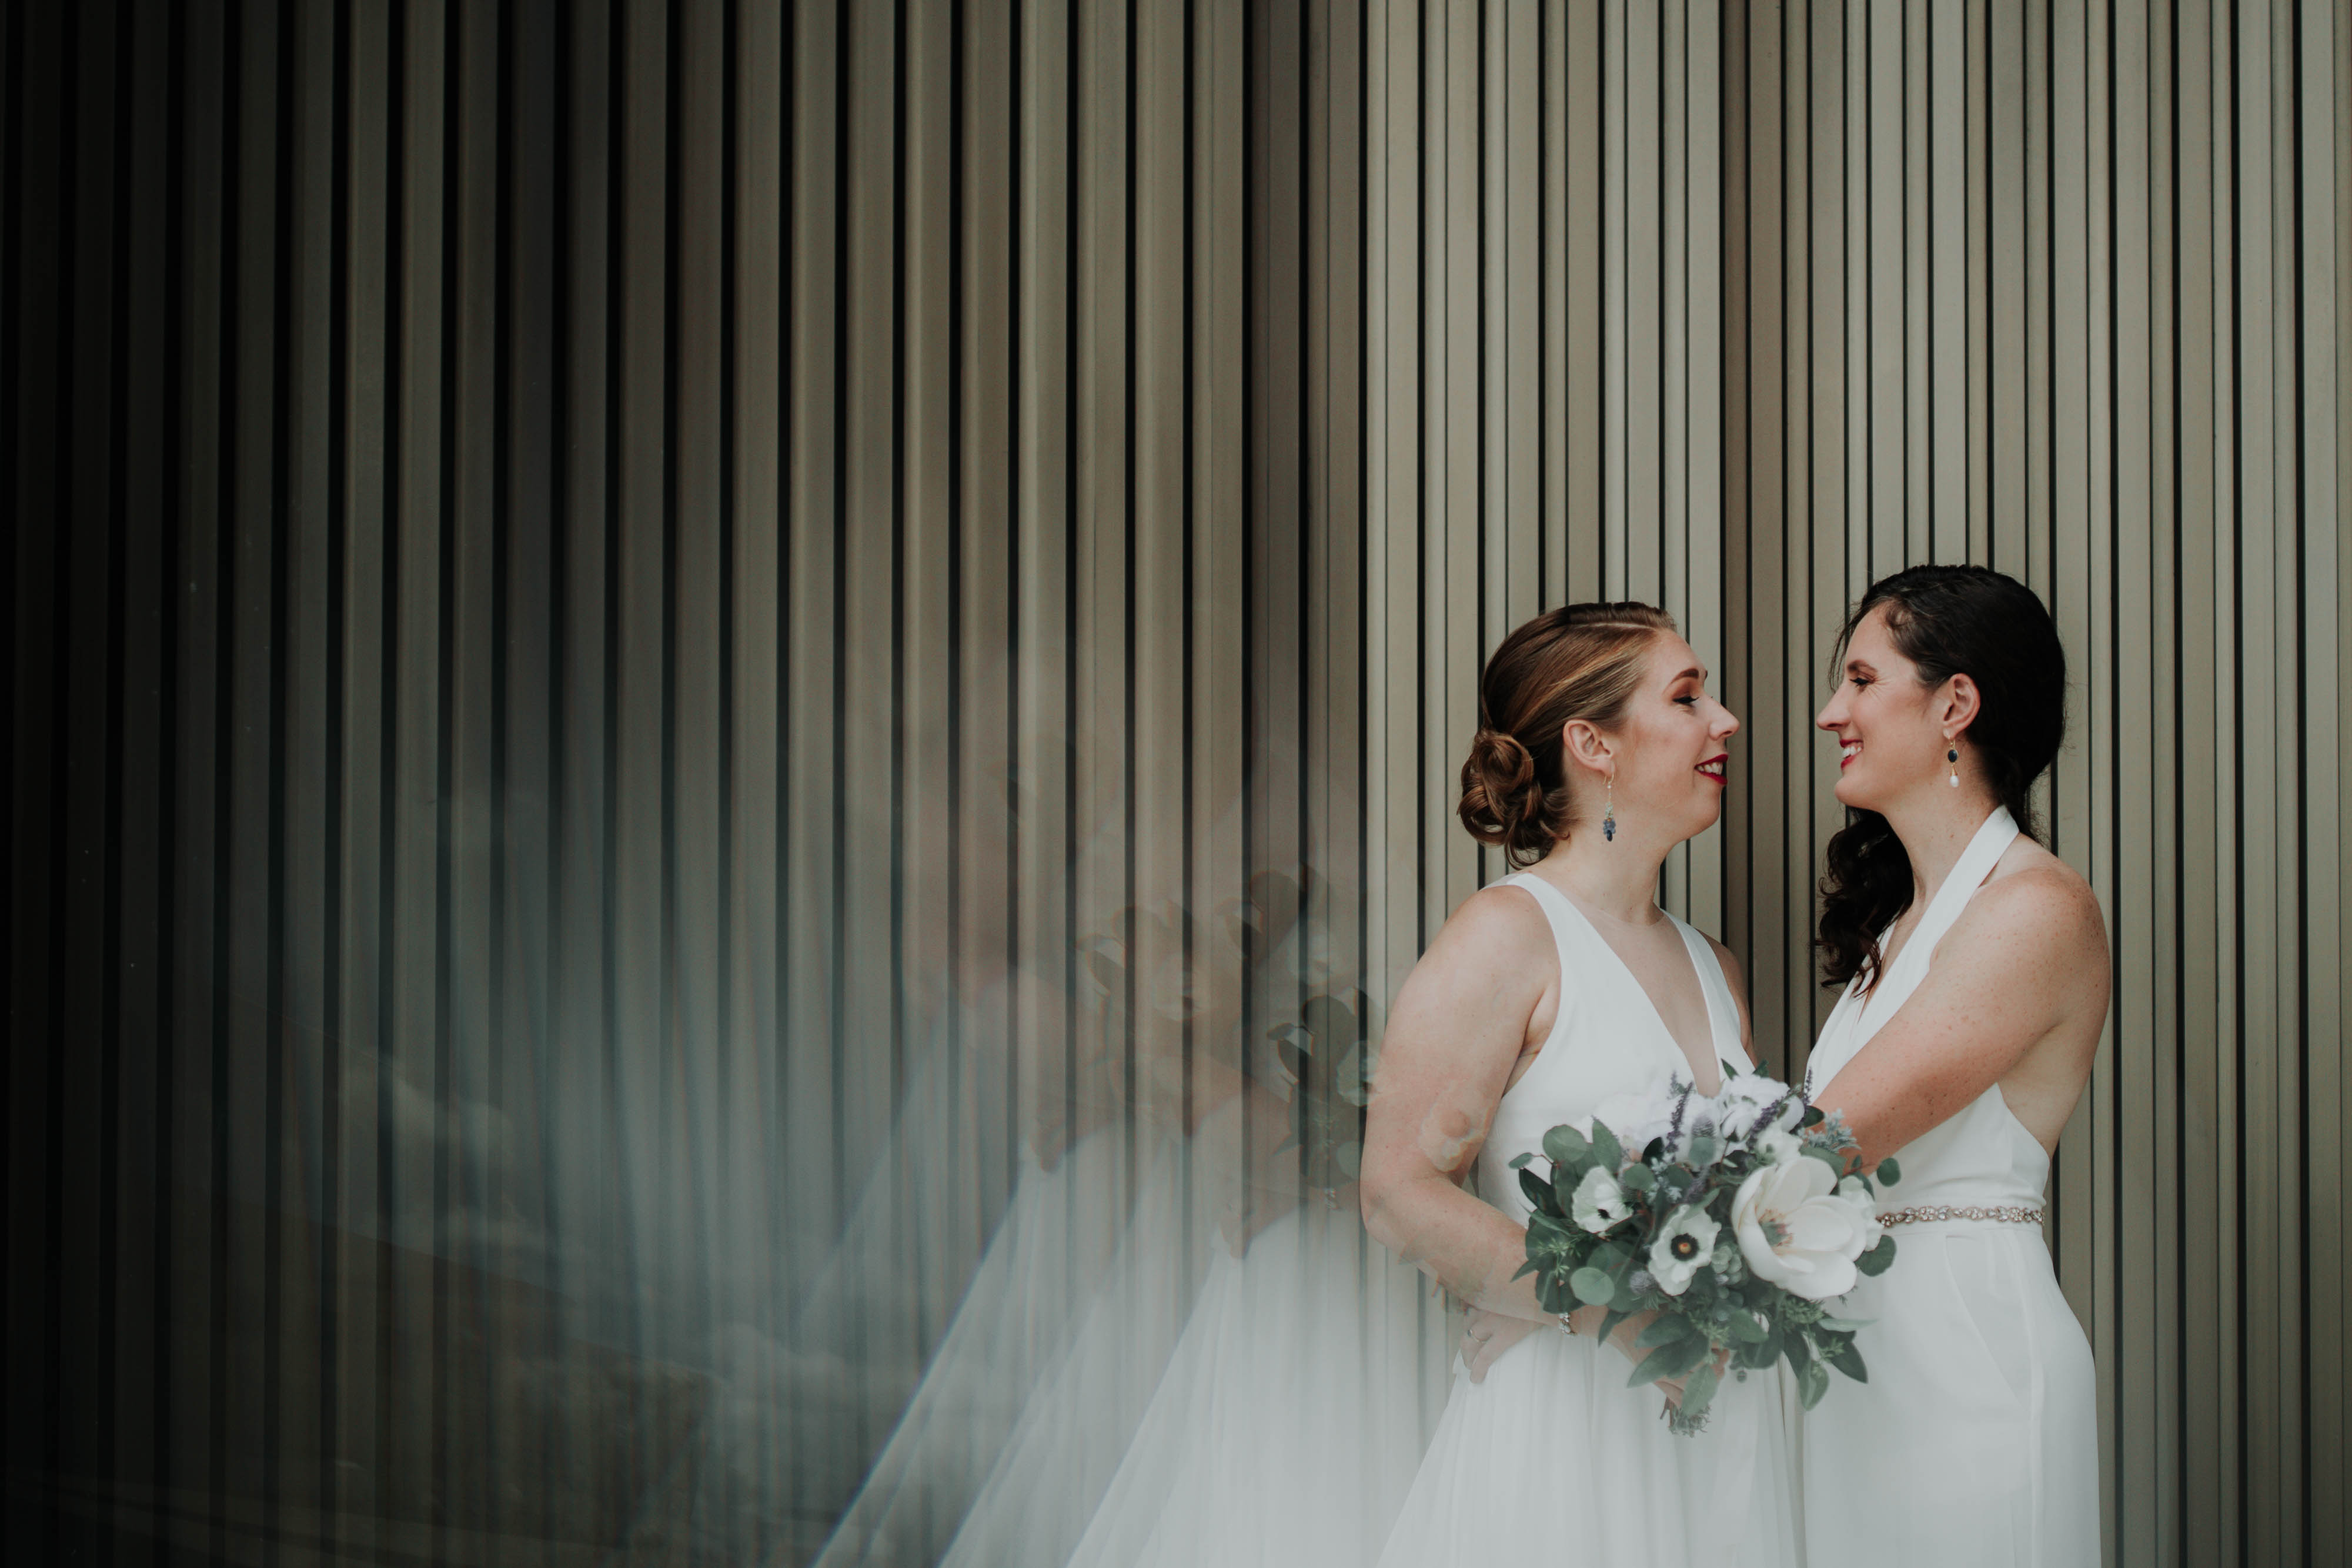 Two women in wedding dresses stand by a wall and embrace.